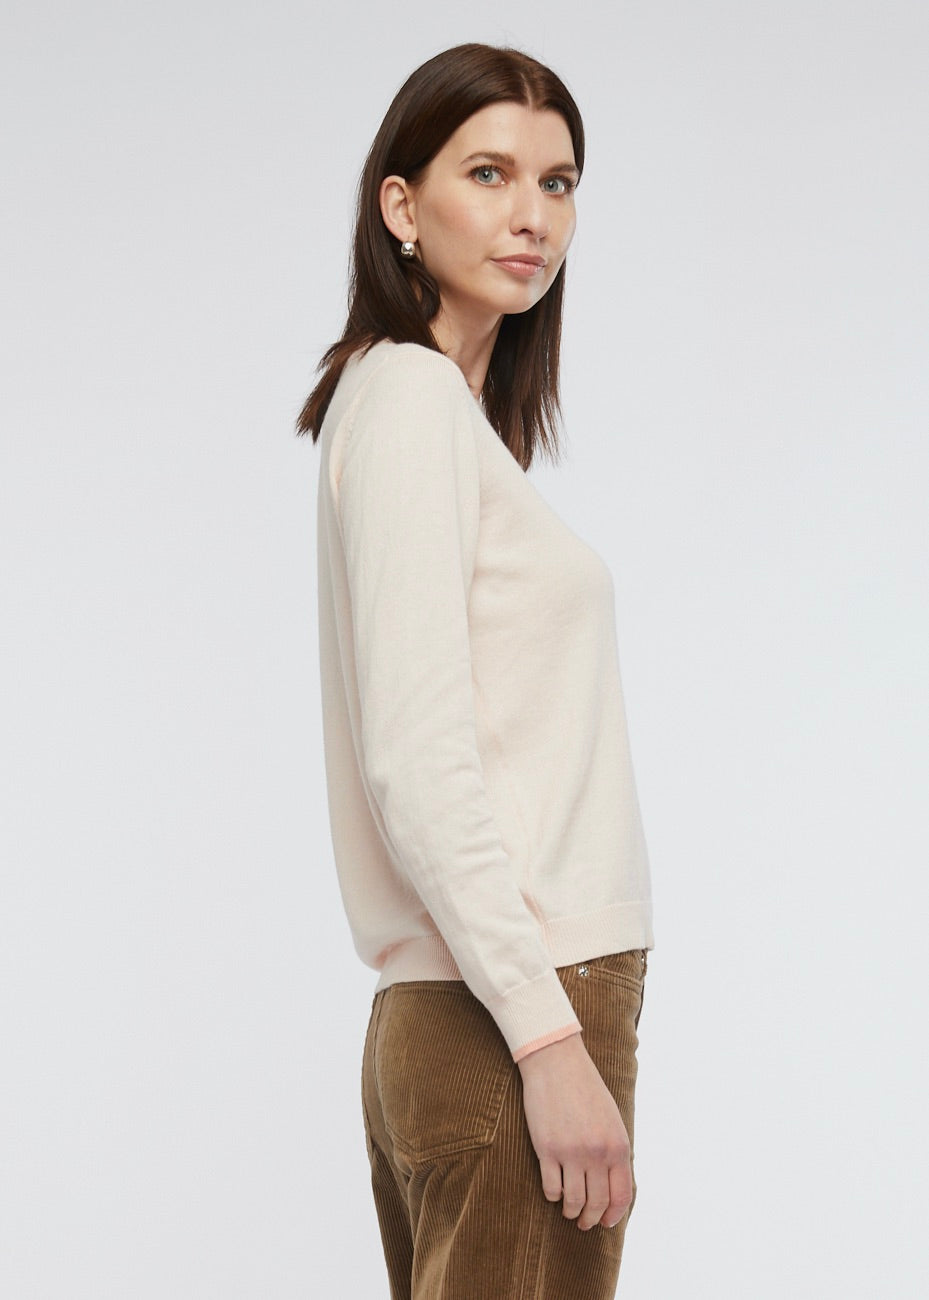 
                  
                    Hearts patch jumper by Zaket & Plover in Blossom
                  
                